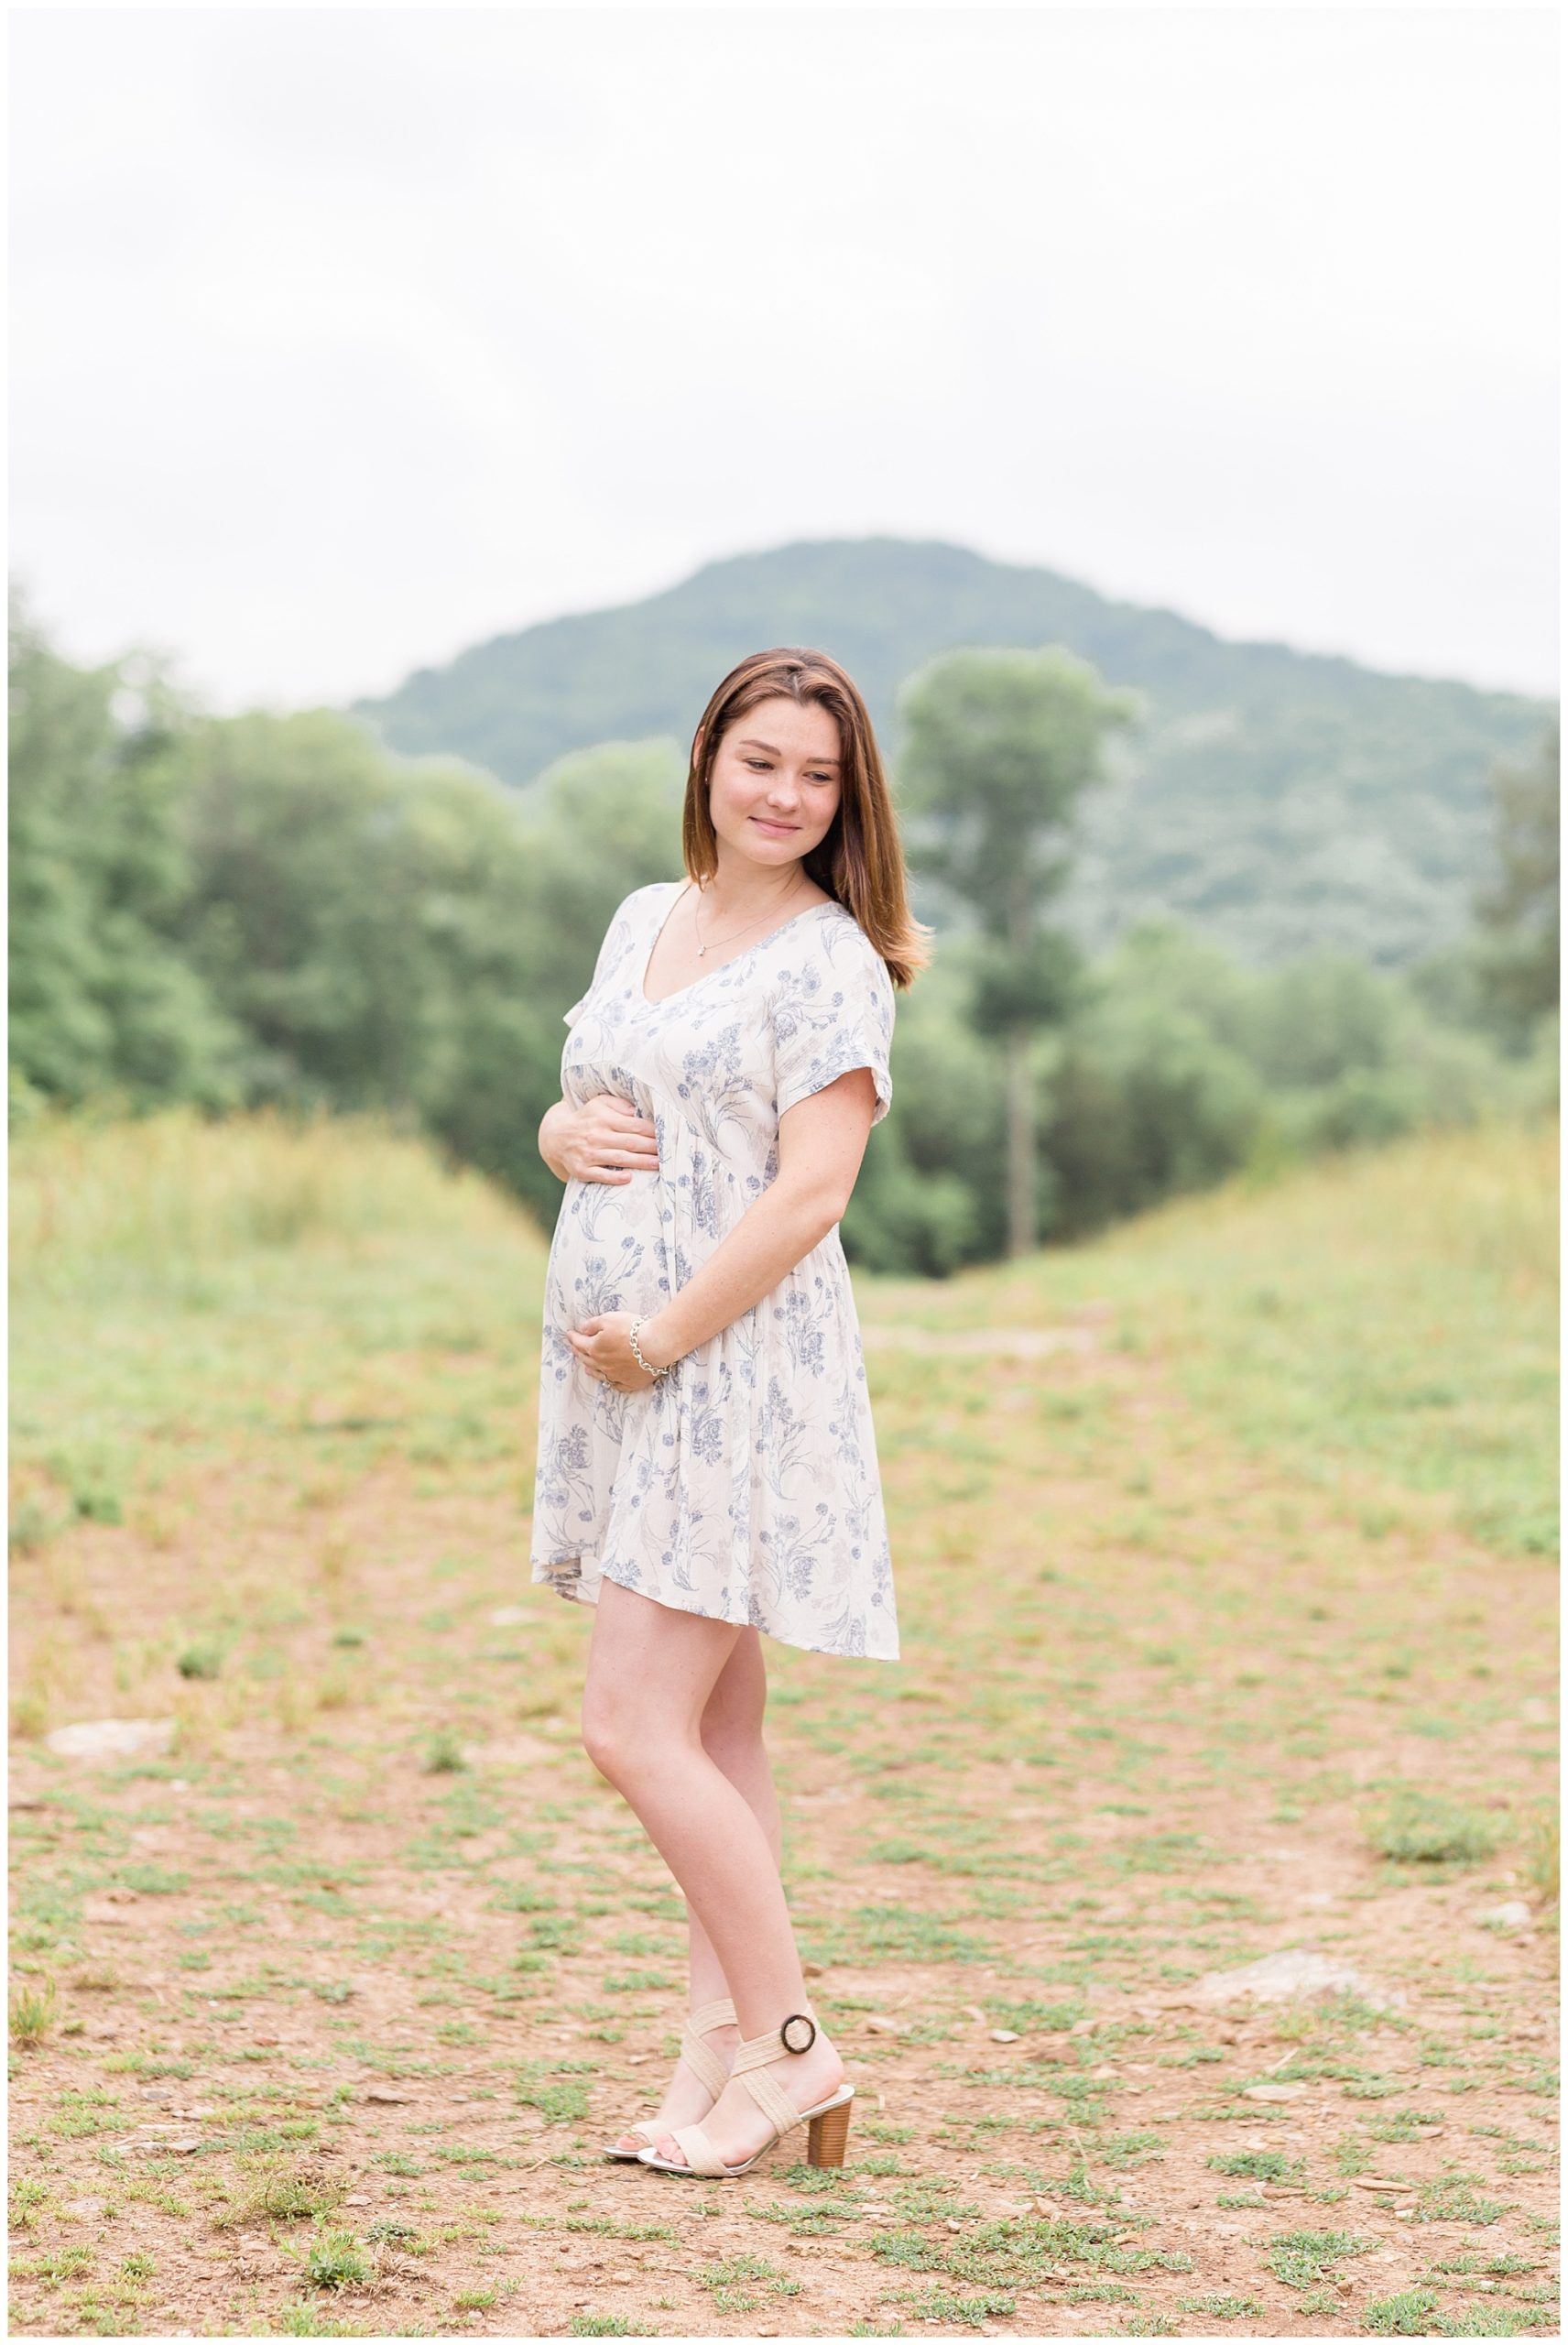 This beautiful mom to be is standing with gorgeous trees and mountians just in the background. She is wearing short sleeve knee length white dress with blue floral print and lace detail at the neckline.